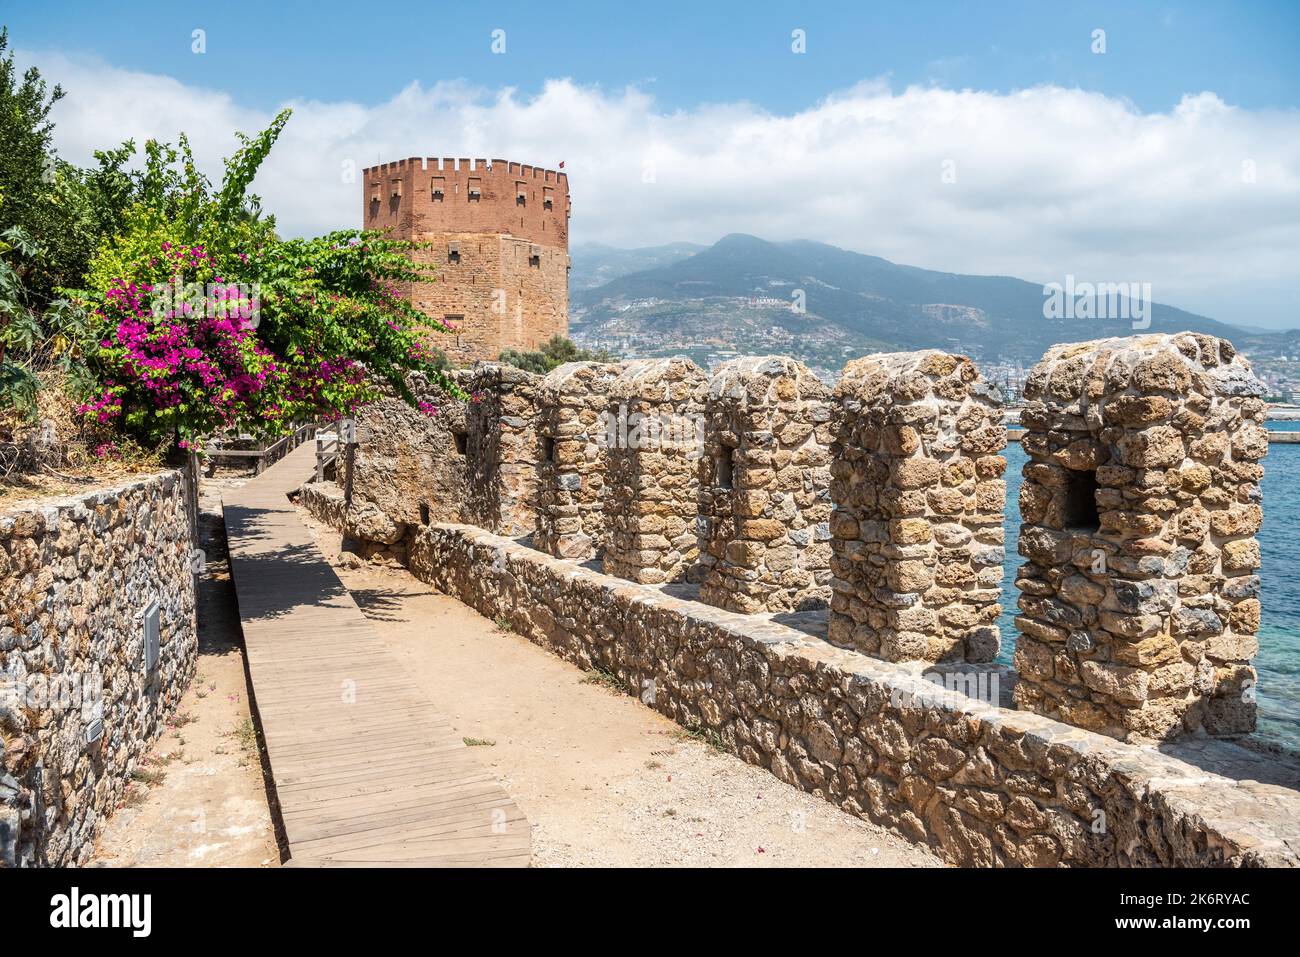 Alanya, Turkey – August 18, 2021. View of old harbour walls and Red Tower in Alanya, Turkey. The five-storey octagonal defence tower was constructed i Stock Photo